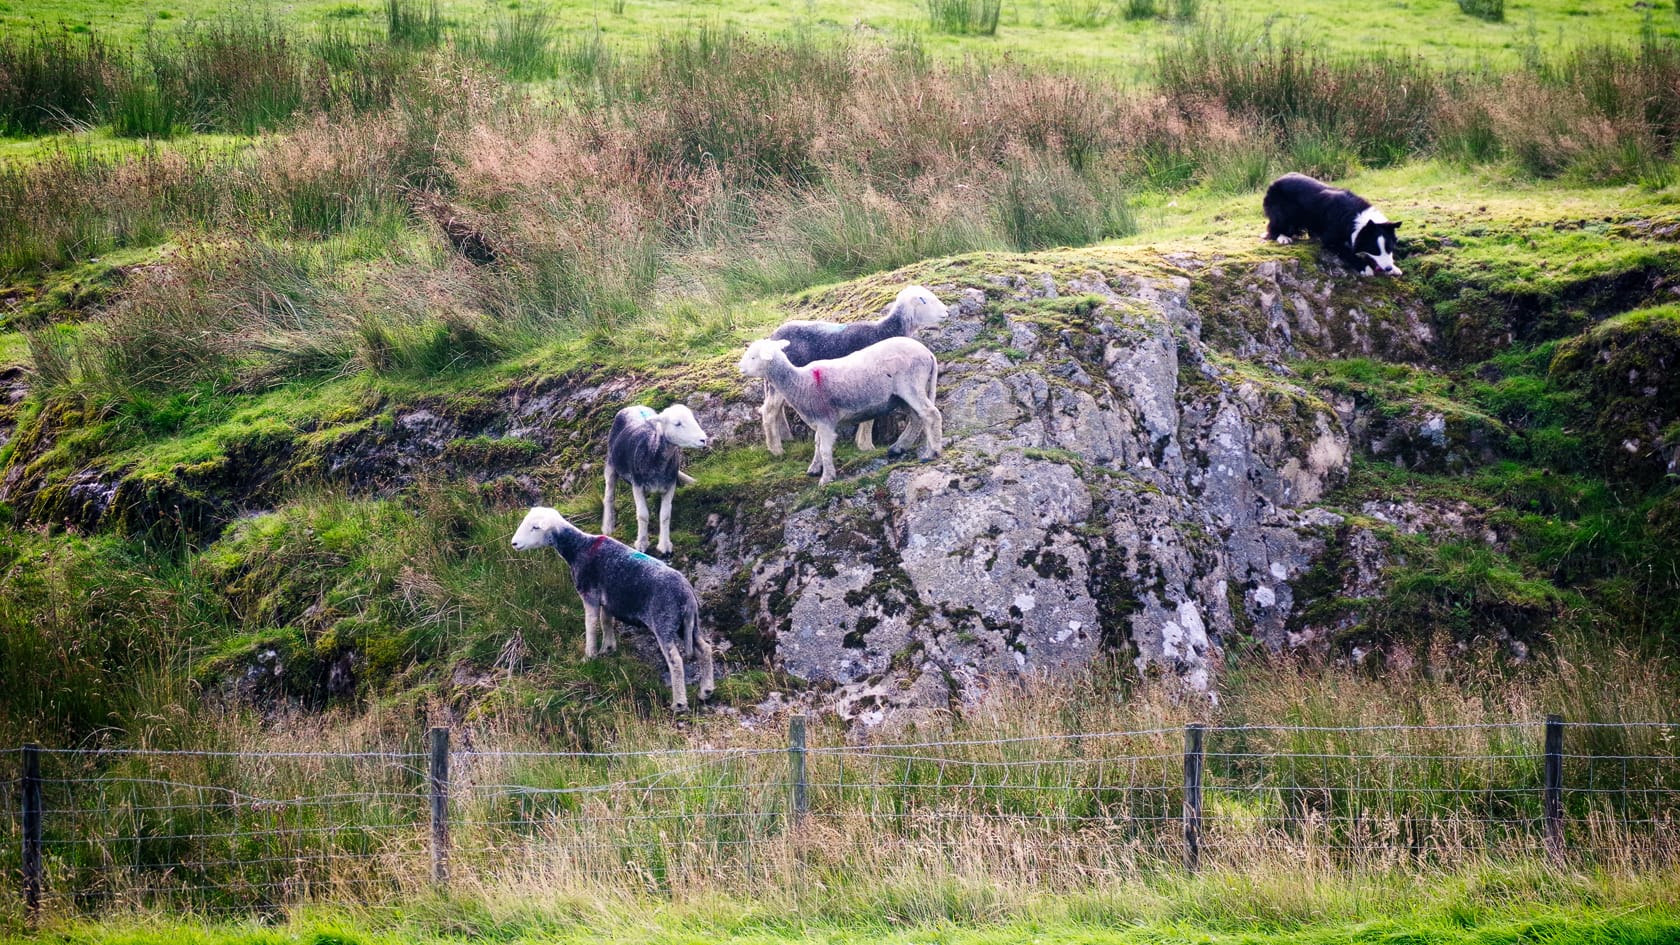 Herdwick sheep being herded by a sheep dog in the Lake District